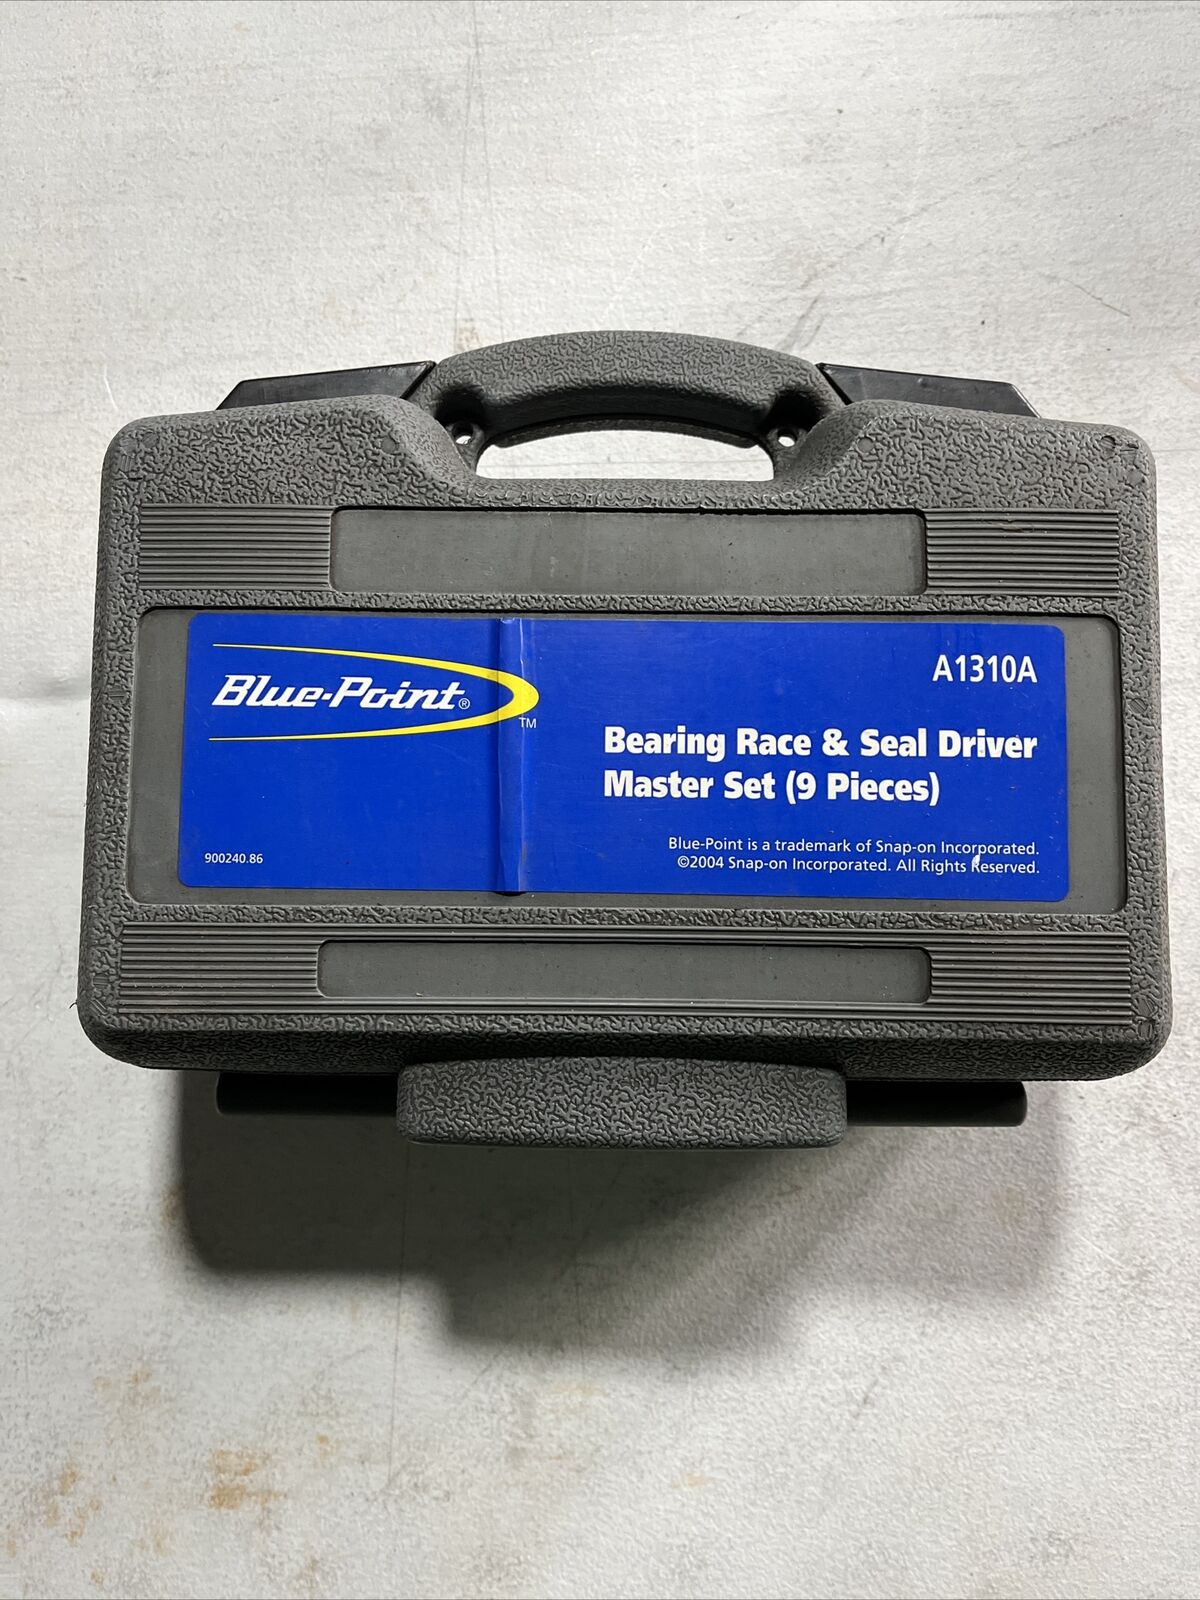 Blue Point Bearing Race And Seal Driver Máster Set 9 Pieces 